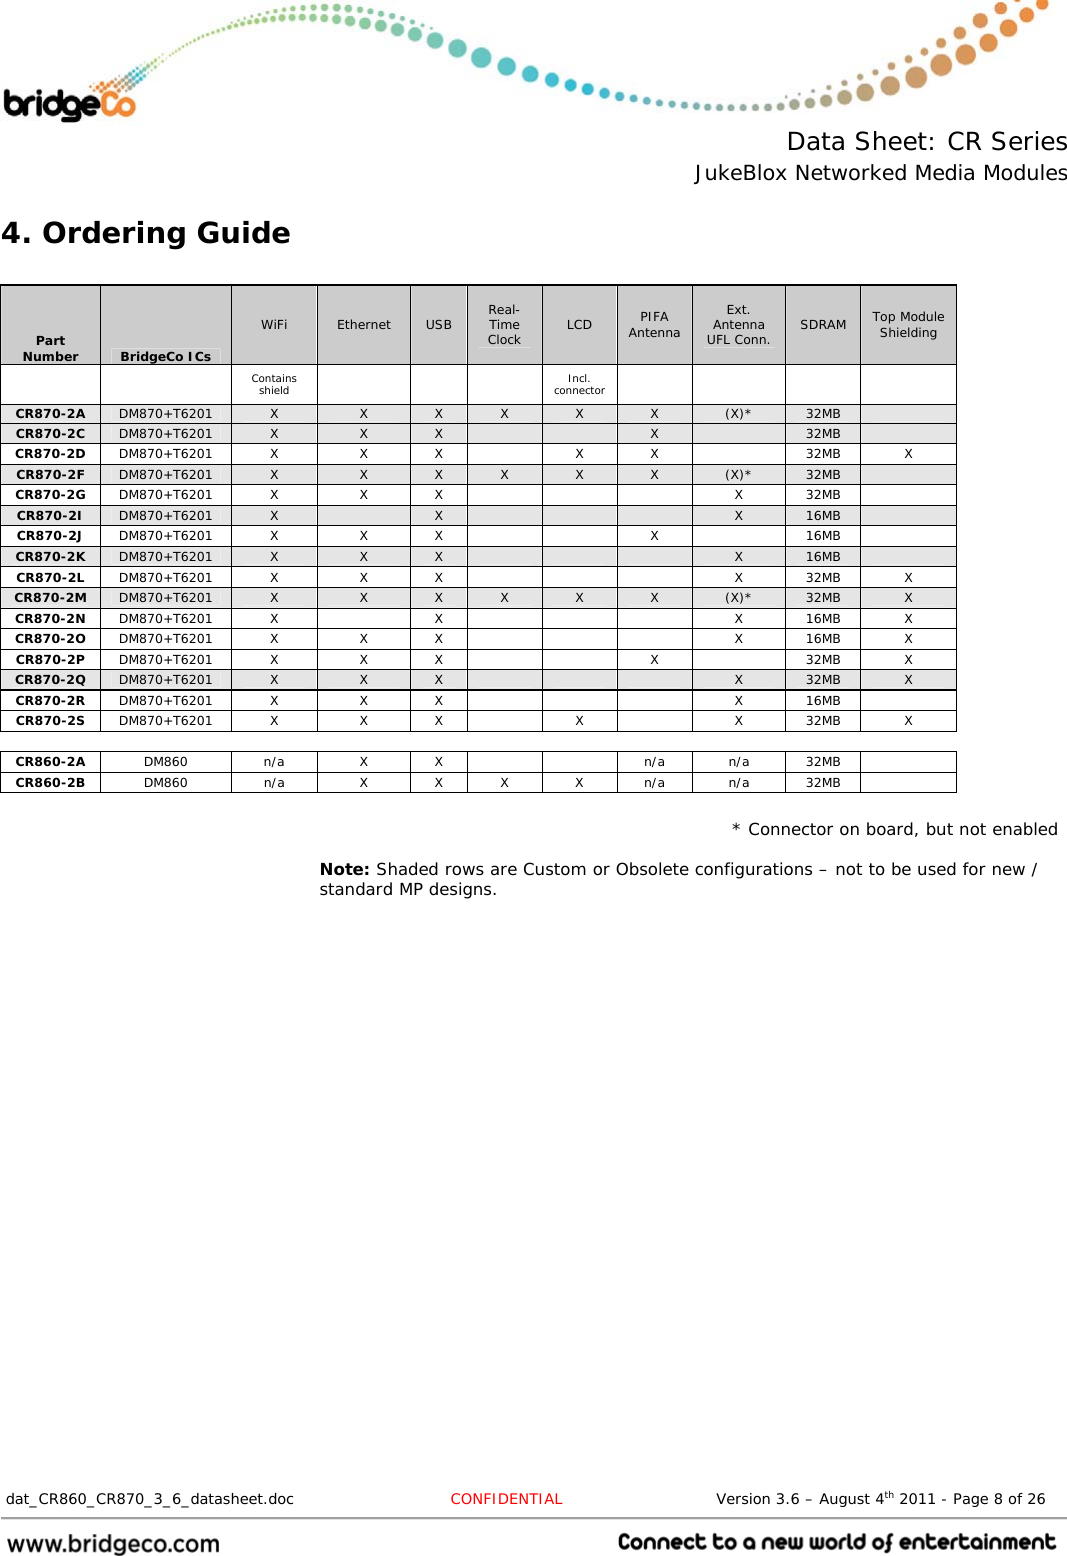  Data Sheet: CR Series JukeBlox Networked Media Modules  dat_CR860_CR870_3_6_datasheet.doc  CONFIDENTIAL                              Version 3.6 – August 4th 2011 - Page 8 of 26                                 4. Ordering Guide  Part Number  BridgeCo ICs WiFi  Ethernet  USB  Real-Time Clock  LCD  PIFA Antenna Ext. Antenna UFL Conn.  SDRAM  Top Module Shielding   Contains shield     Incl. connector      CR870-2A  DM870+T6201  X  X  X  X  X  X  (X)*  32MB   CR870-2C  DM870+T6201  X  X  X      X   32MB   CR870-2D  DM870+T6201 X  X X   X X   32MB X CR870-2F  DM870+T6201  X  X  X  X  X  X  (X)*  32MB   CR870-2G  DM870+T6201 X  X X     X 32MB  CR870-2I  DM870+T6201  X   X      X  16MB   CR870-2J  DM870+T6201 X  X  X      X    16MB   CR870-2K  DM870+T6201  X  X  X      X  16MB   CR870-2L  DM870+T6201 X  X X     X 32MB X CR870-2M  DM870+T6201  X  X  X  X  X  X  (X)*  32MB  X CR870-2N  DM870+T6201 X   X     X 16MB X CR870-2O  DM870+T6201 X  X X     X 16MB X CR870-2P  DM870+T6201 X  X  X      X    32MB  X CR870-2Q  DM870+T6201  X  X  X      X  32MB  X CR870-2R  DM870+T6201 X  X X     X 16MB  CR870-2S  DM870+T6201 X  X  X    X    X  32MB  X  CR860-2A  DM860 n/a X X   n/a n/a 32MB  CR860-2B  DM860  n/a  X X X X n/a n/a 32MB   * Connector on board, but not enabled  Note: Shaded rows are Custom or Obsolete configurations – not to be used for new / standard MP designs.  